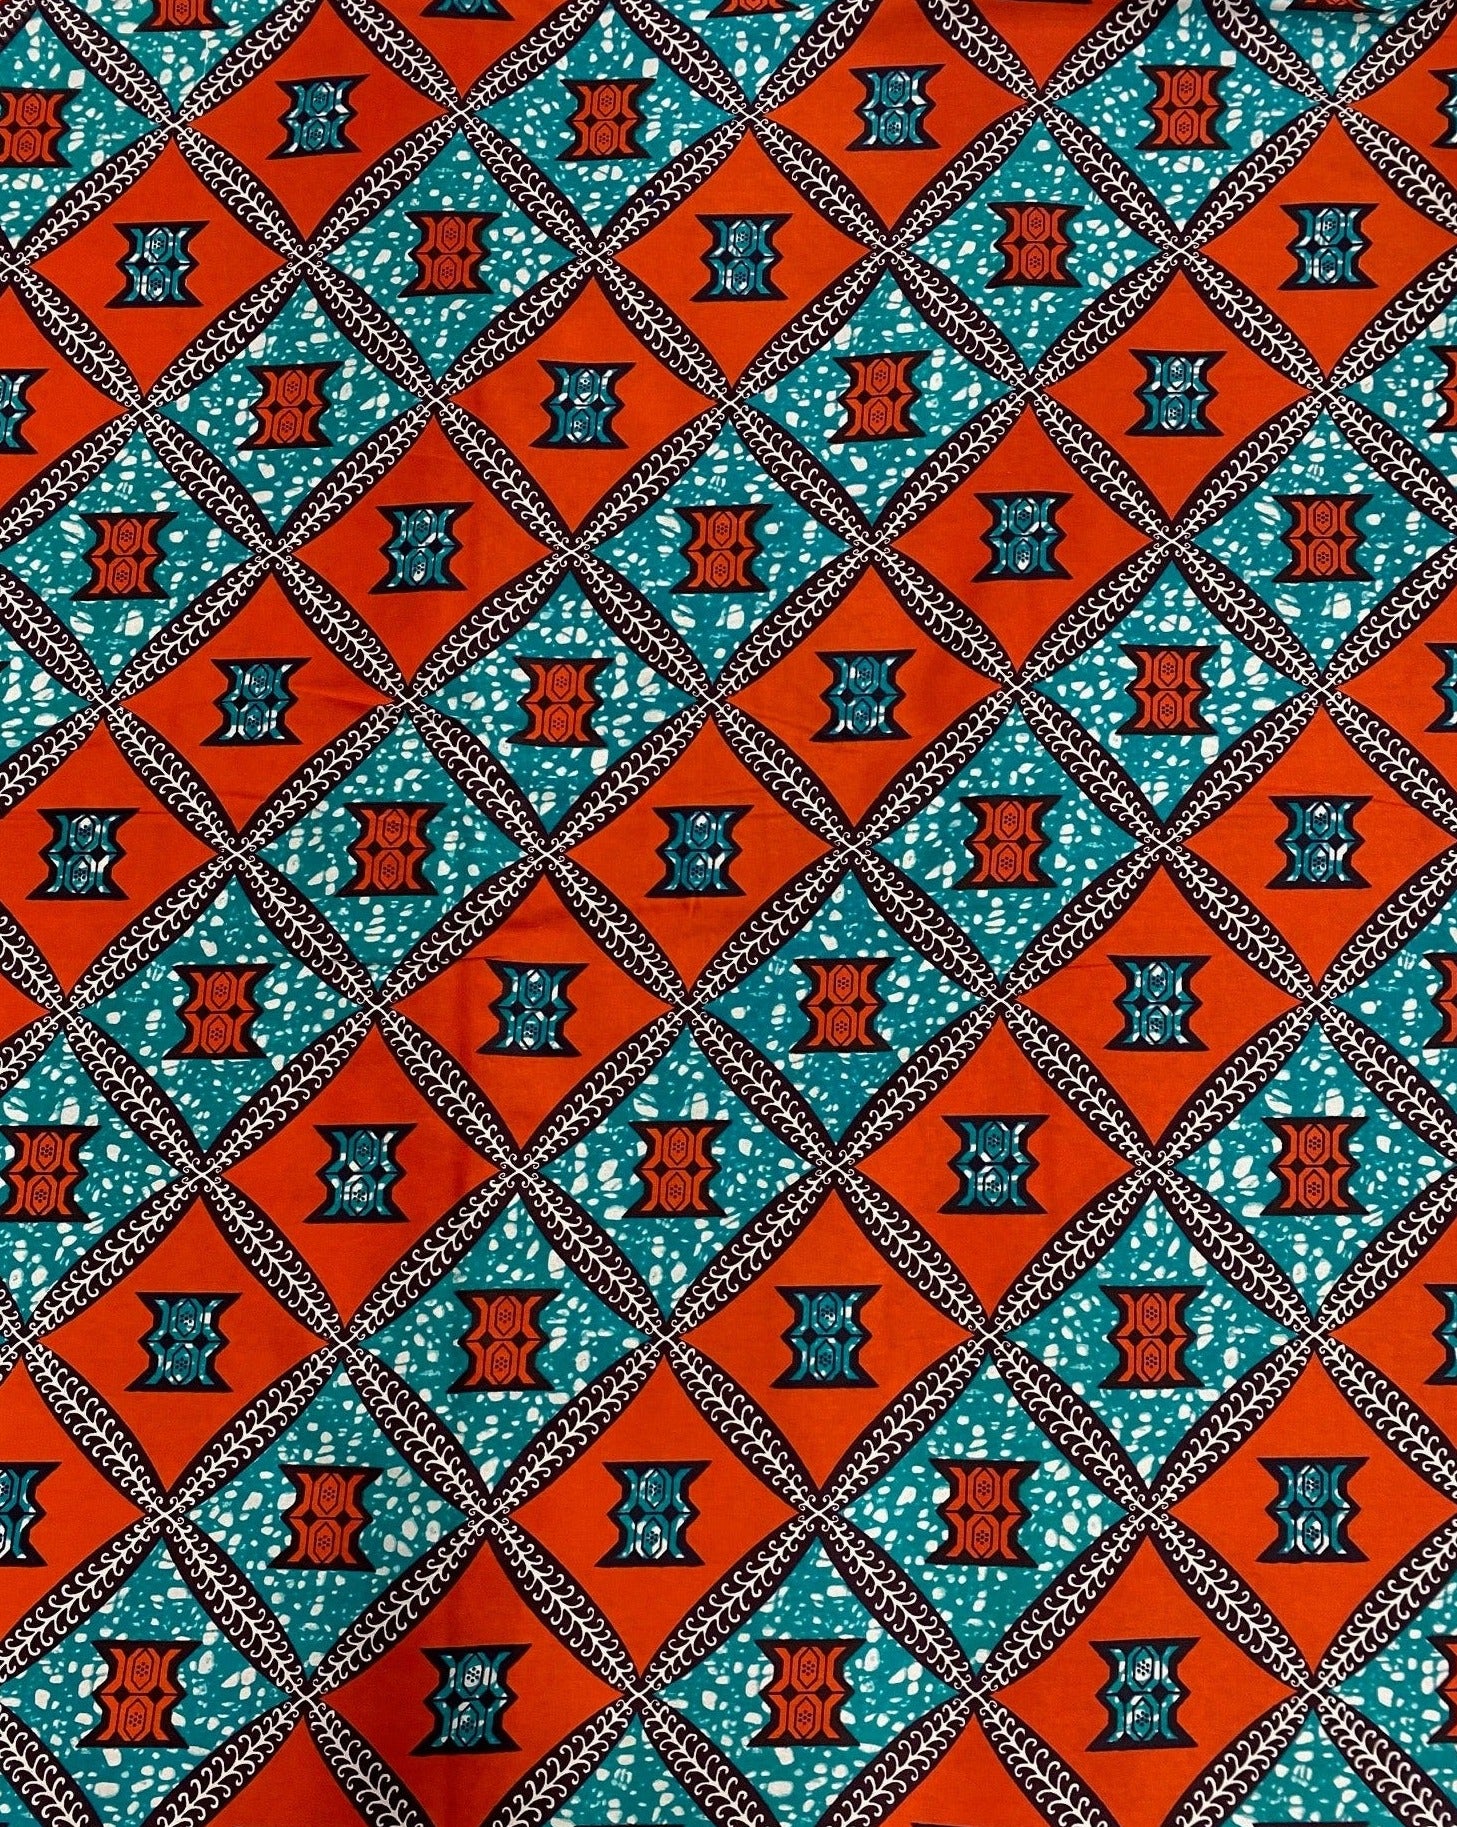 Teal and Tango Cotton Fabric - Vibrant Hues, 100% Cotton, 44" Wide